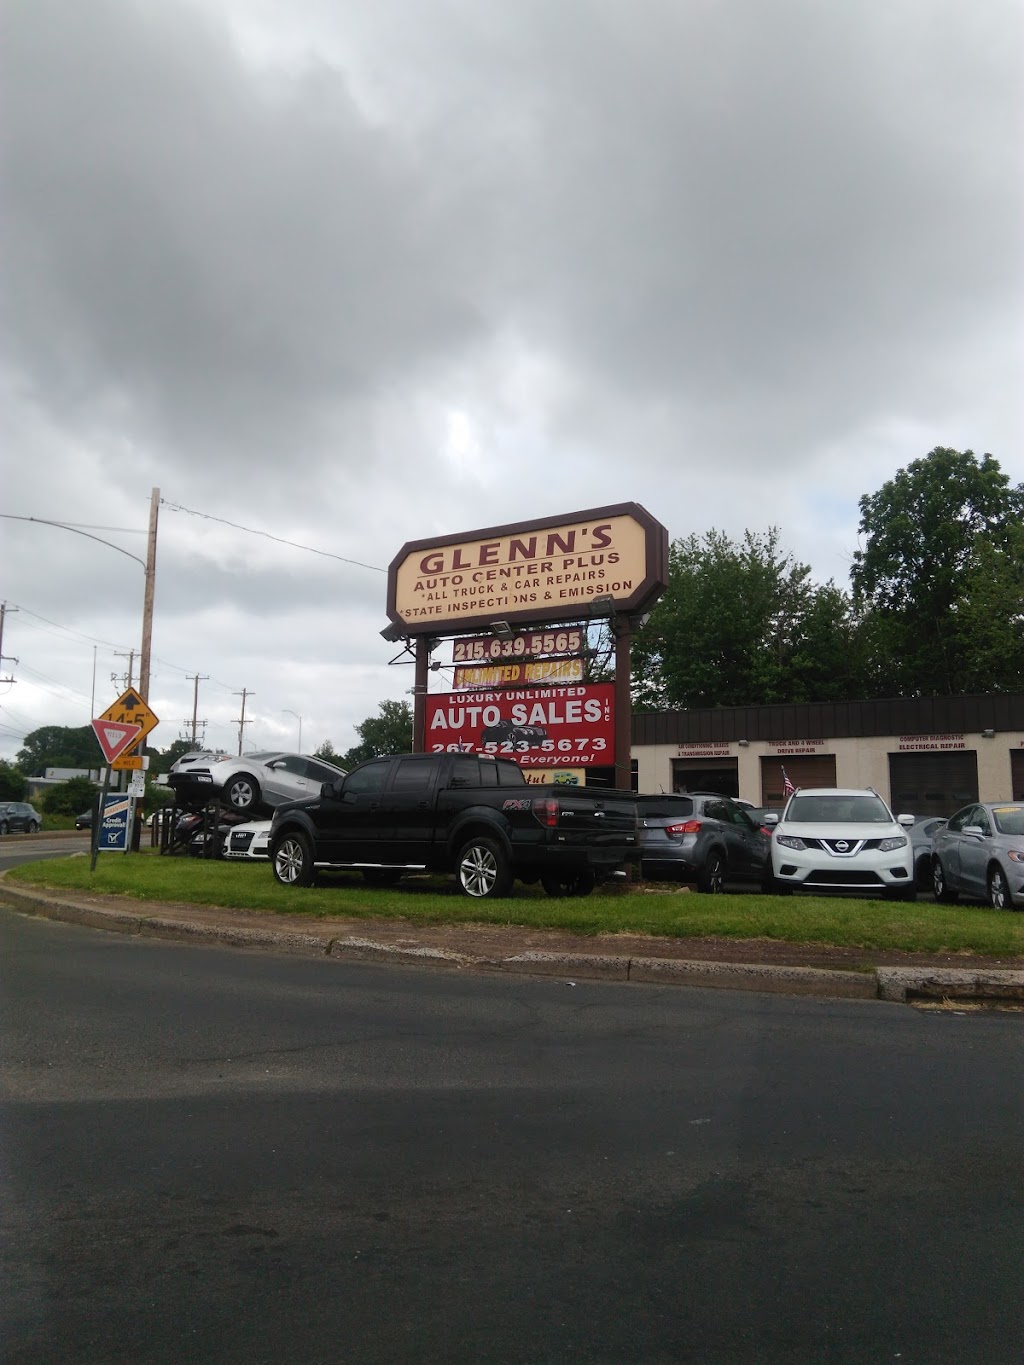 Glenns Auto Center Plus | 2907 Old Lincoln Hwy, Trevose, PA 19053 | Phone: (215) 639-5565